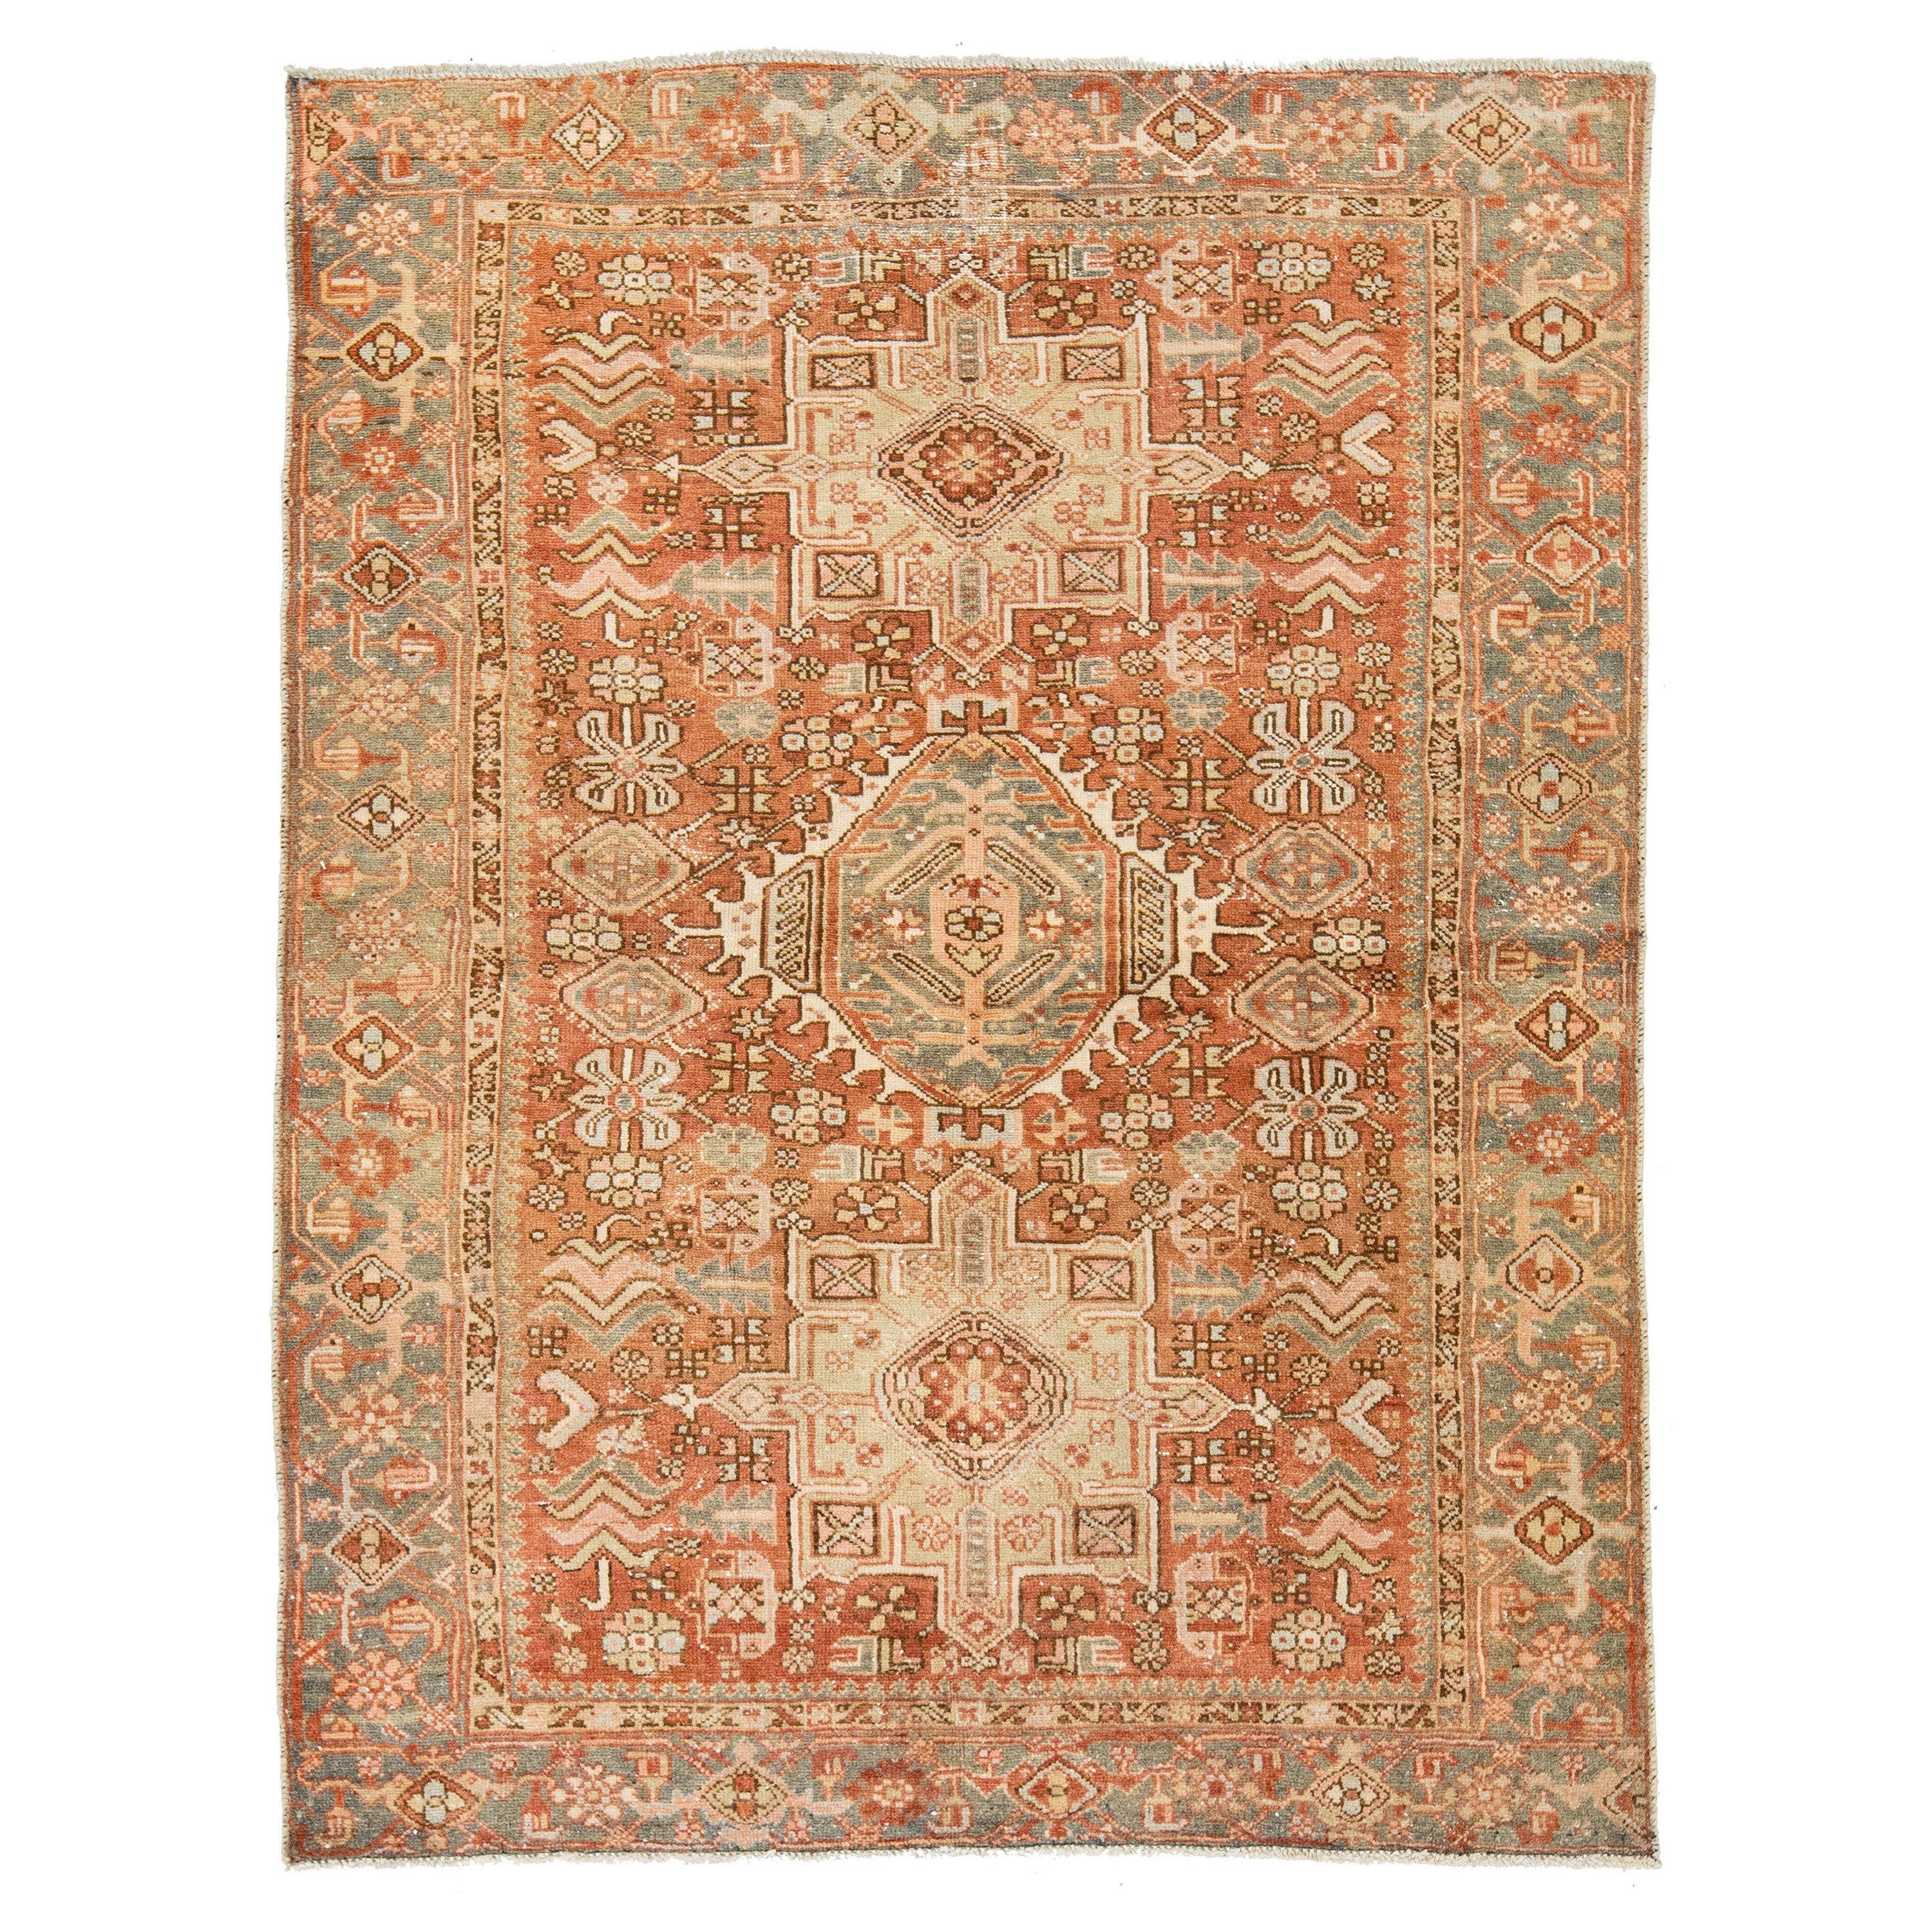 Persian Heriz Antique Wool Rug In Rust Color Featuring a Tribal Pattern